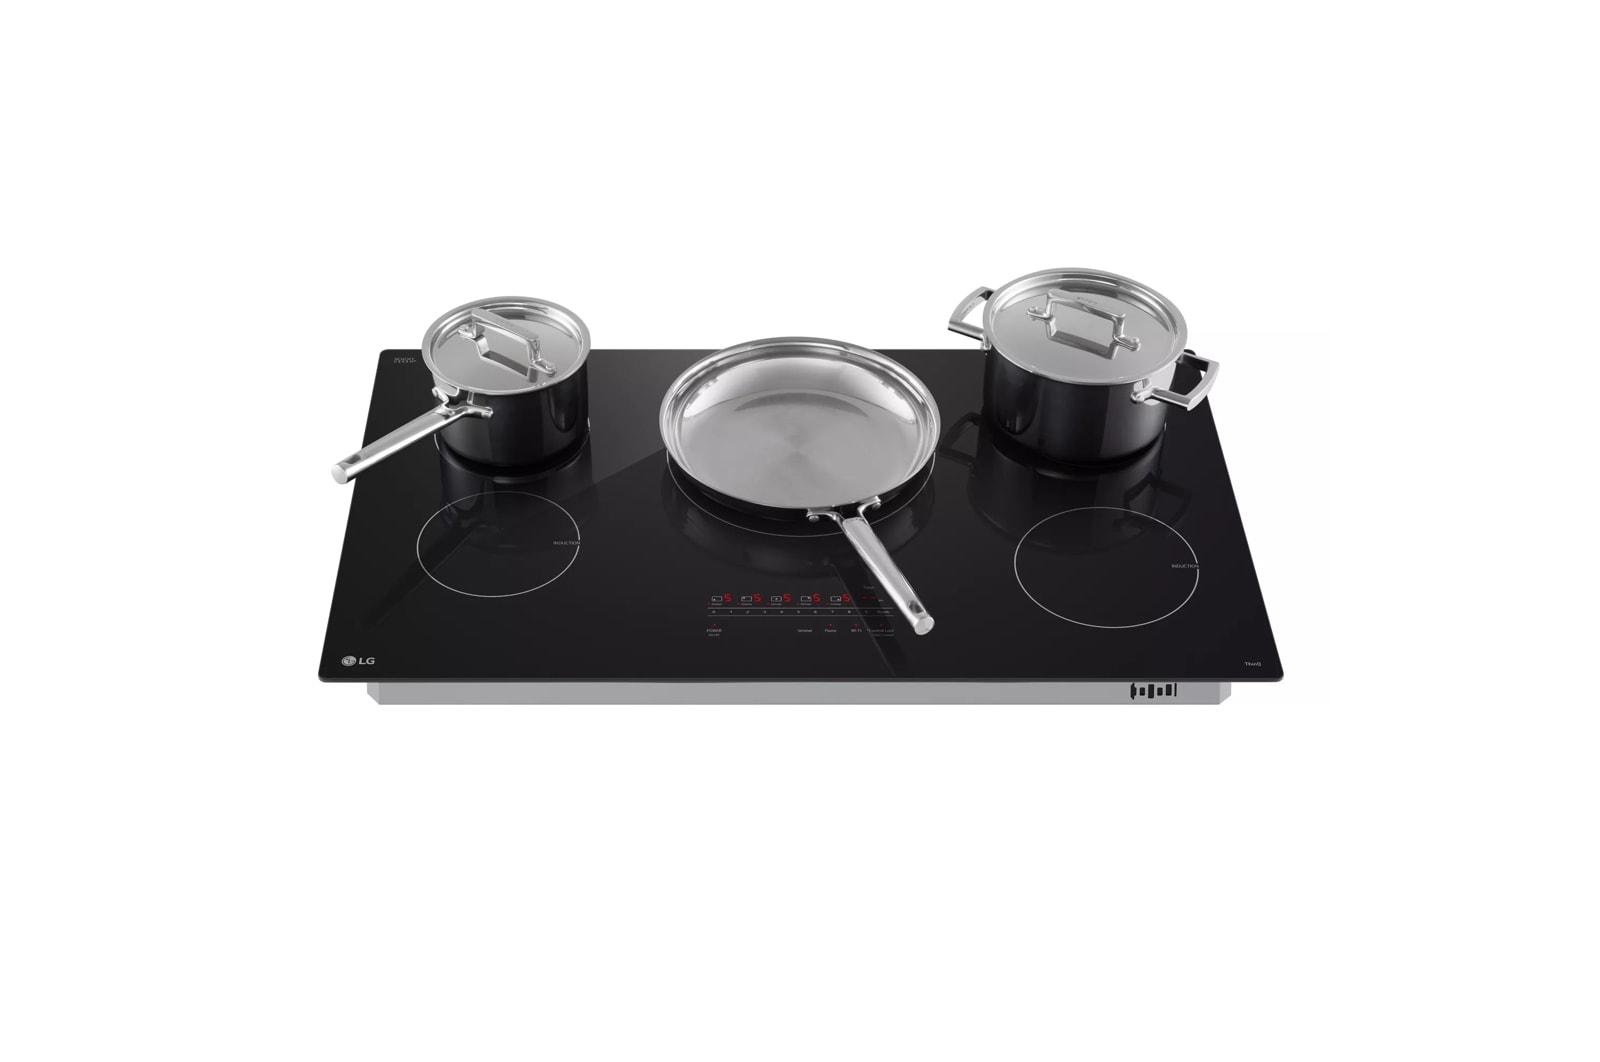 LG Smart Induction Cooktop 30-Inch In Black Glass - CBIH3013BE